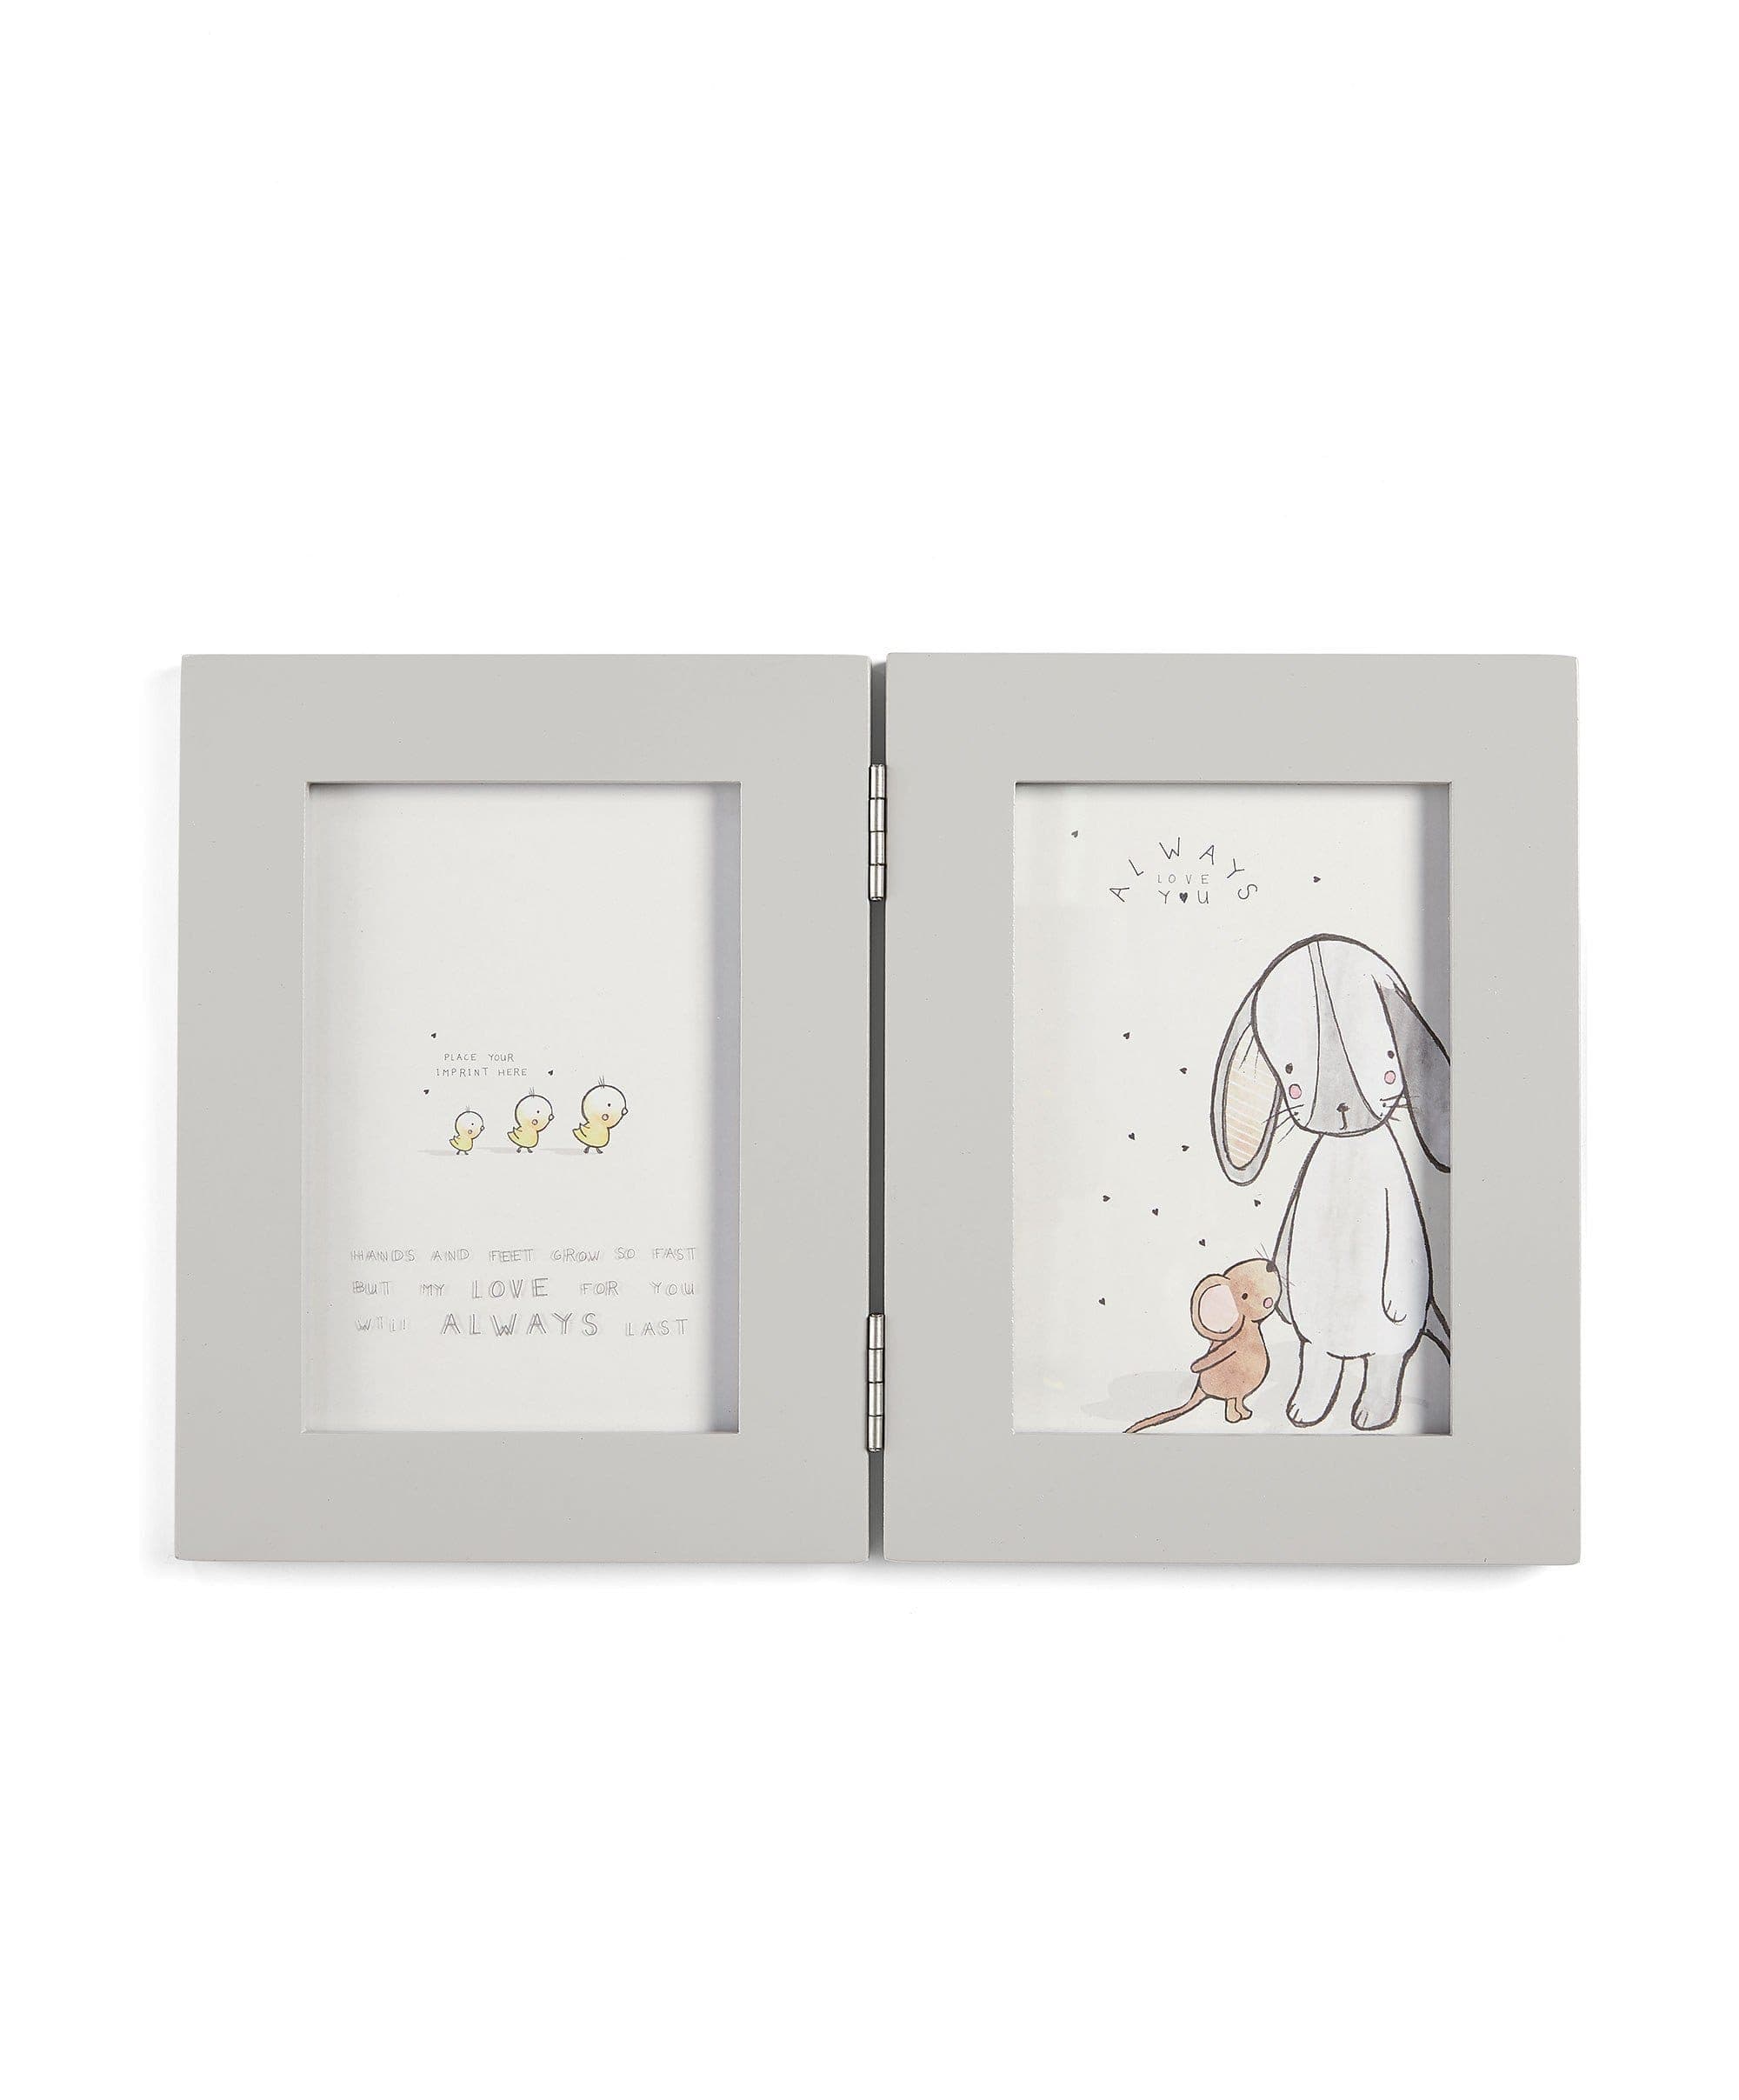 Baby Foot and Handprint Frame Kit - Always Love You